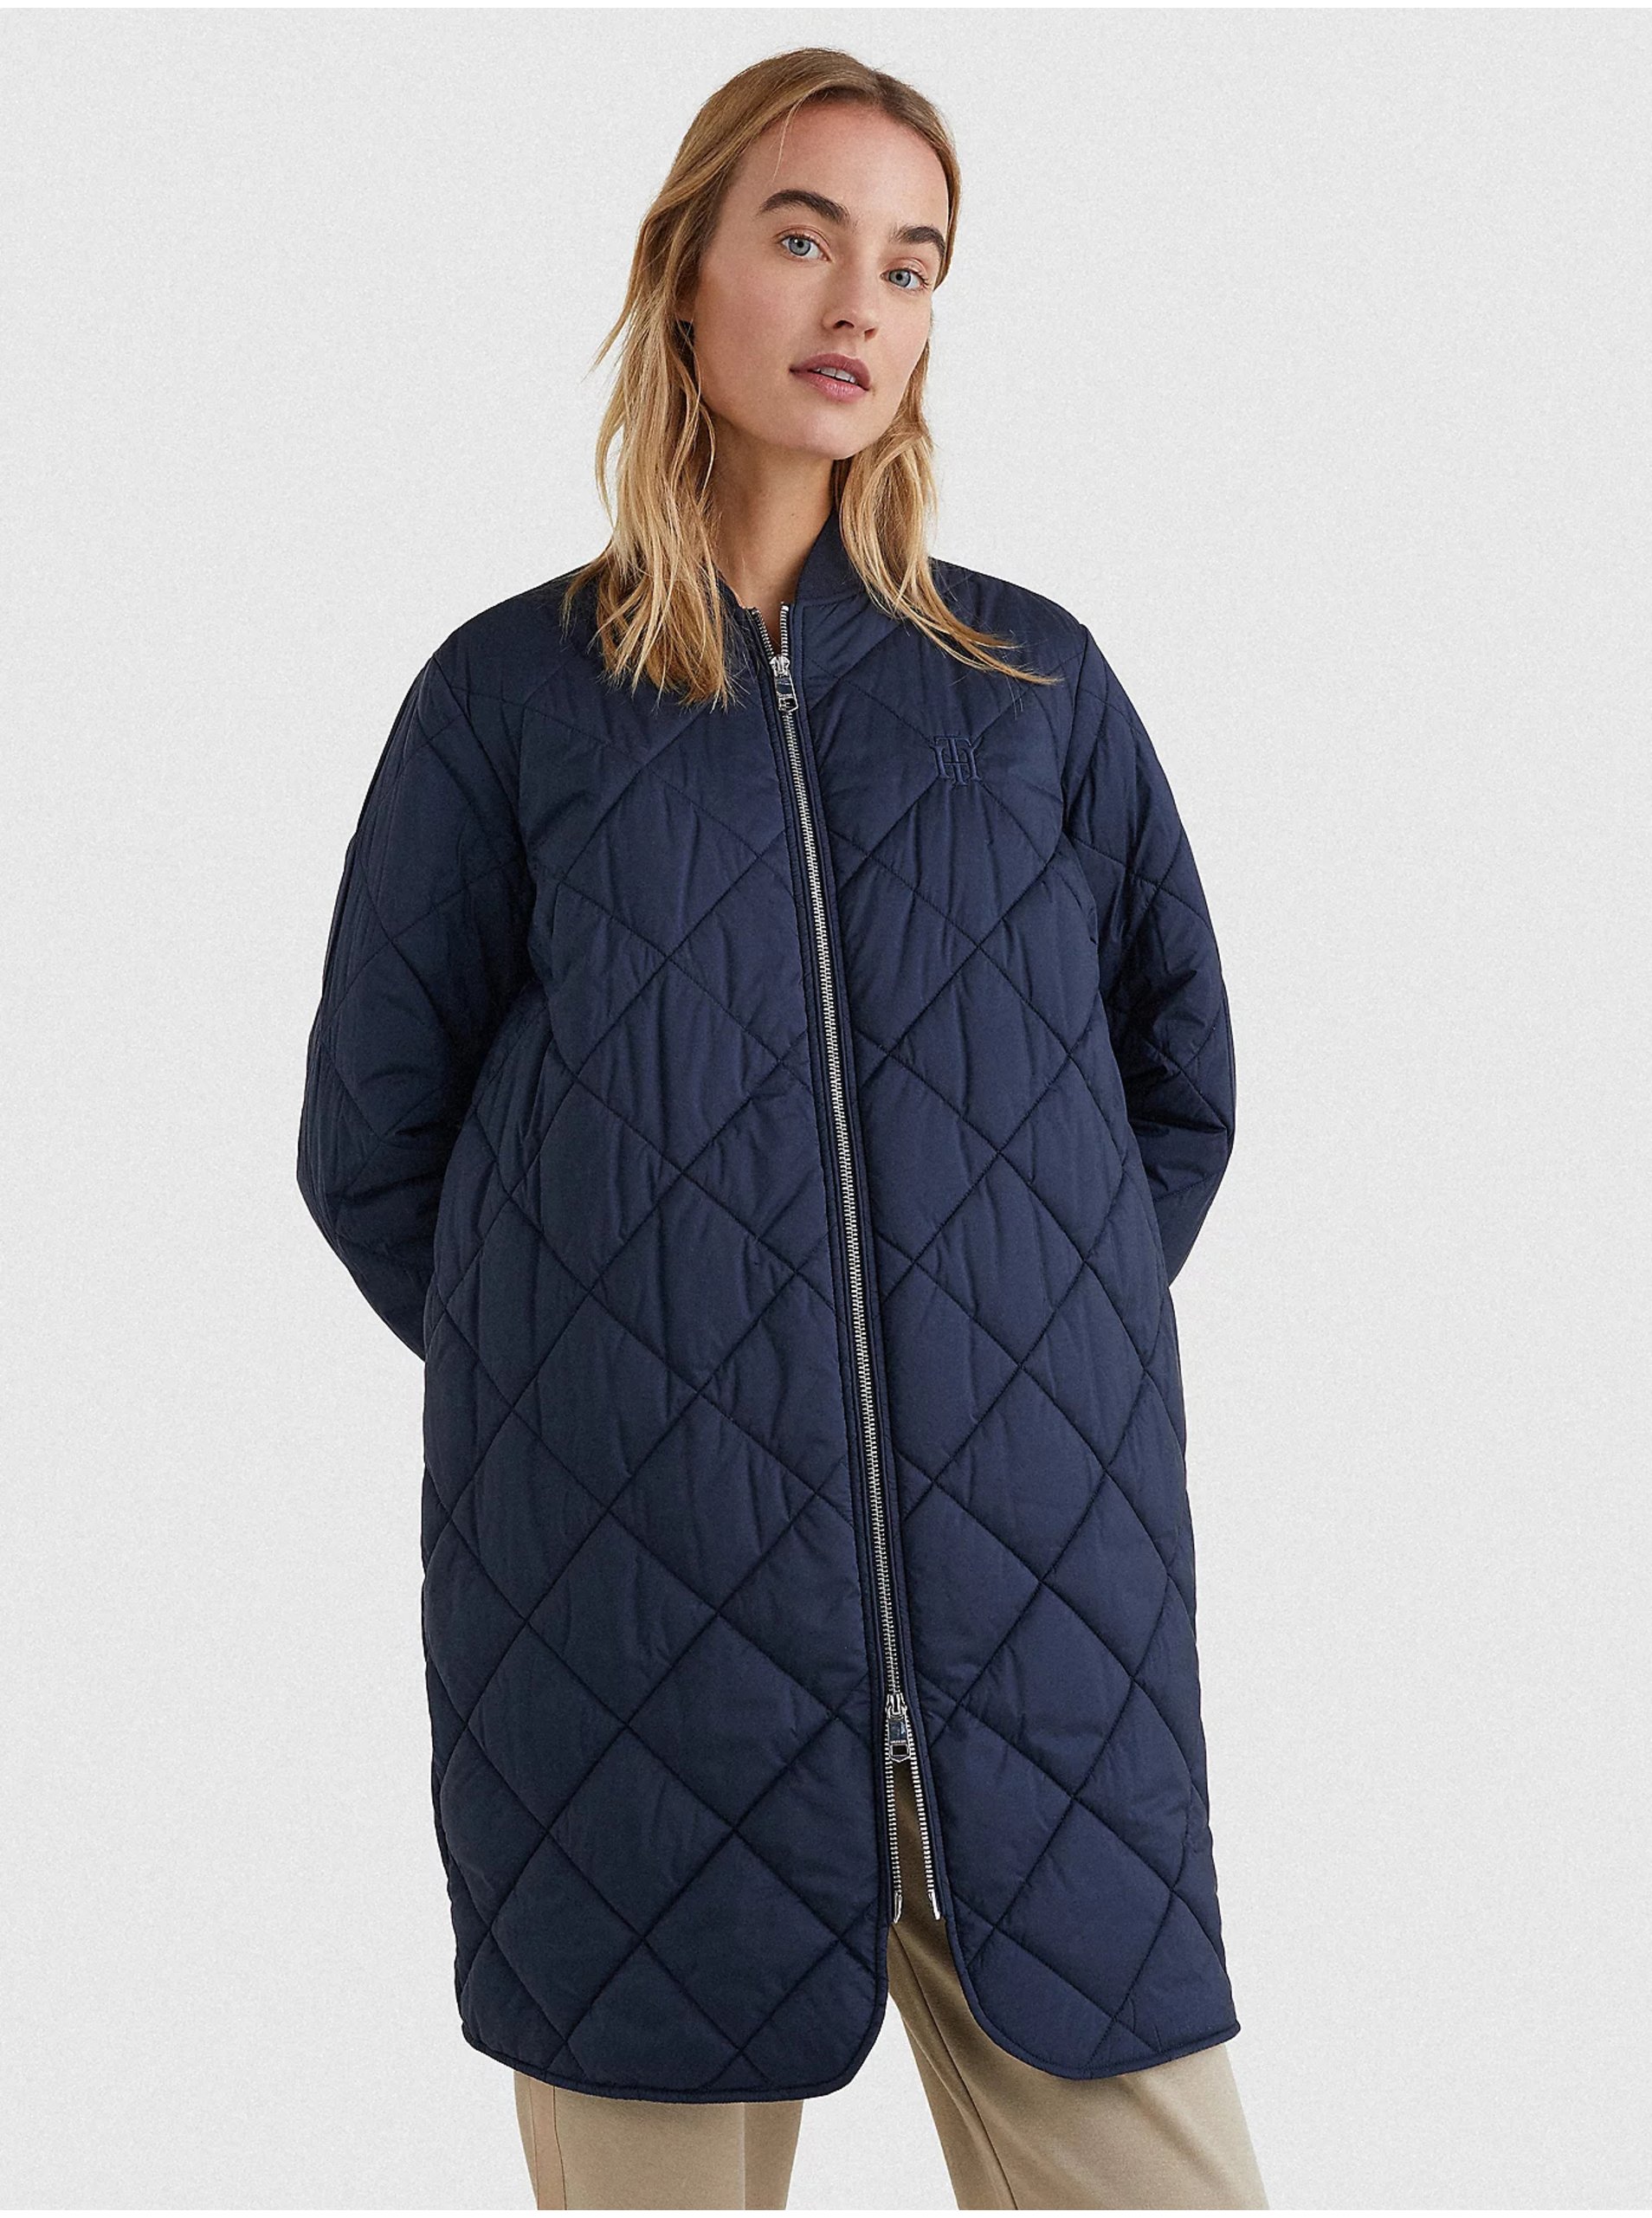 Women's Quilted Coat Navy Blue Tommy Hilfiger - Women